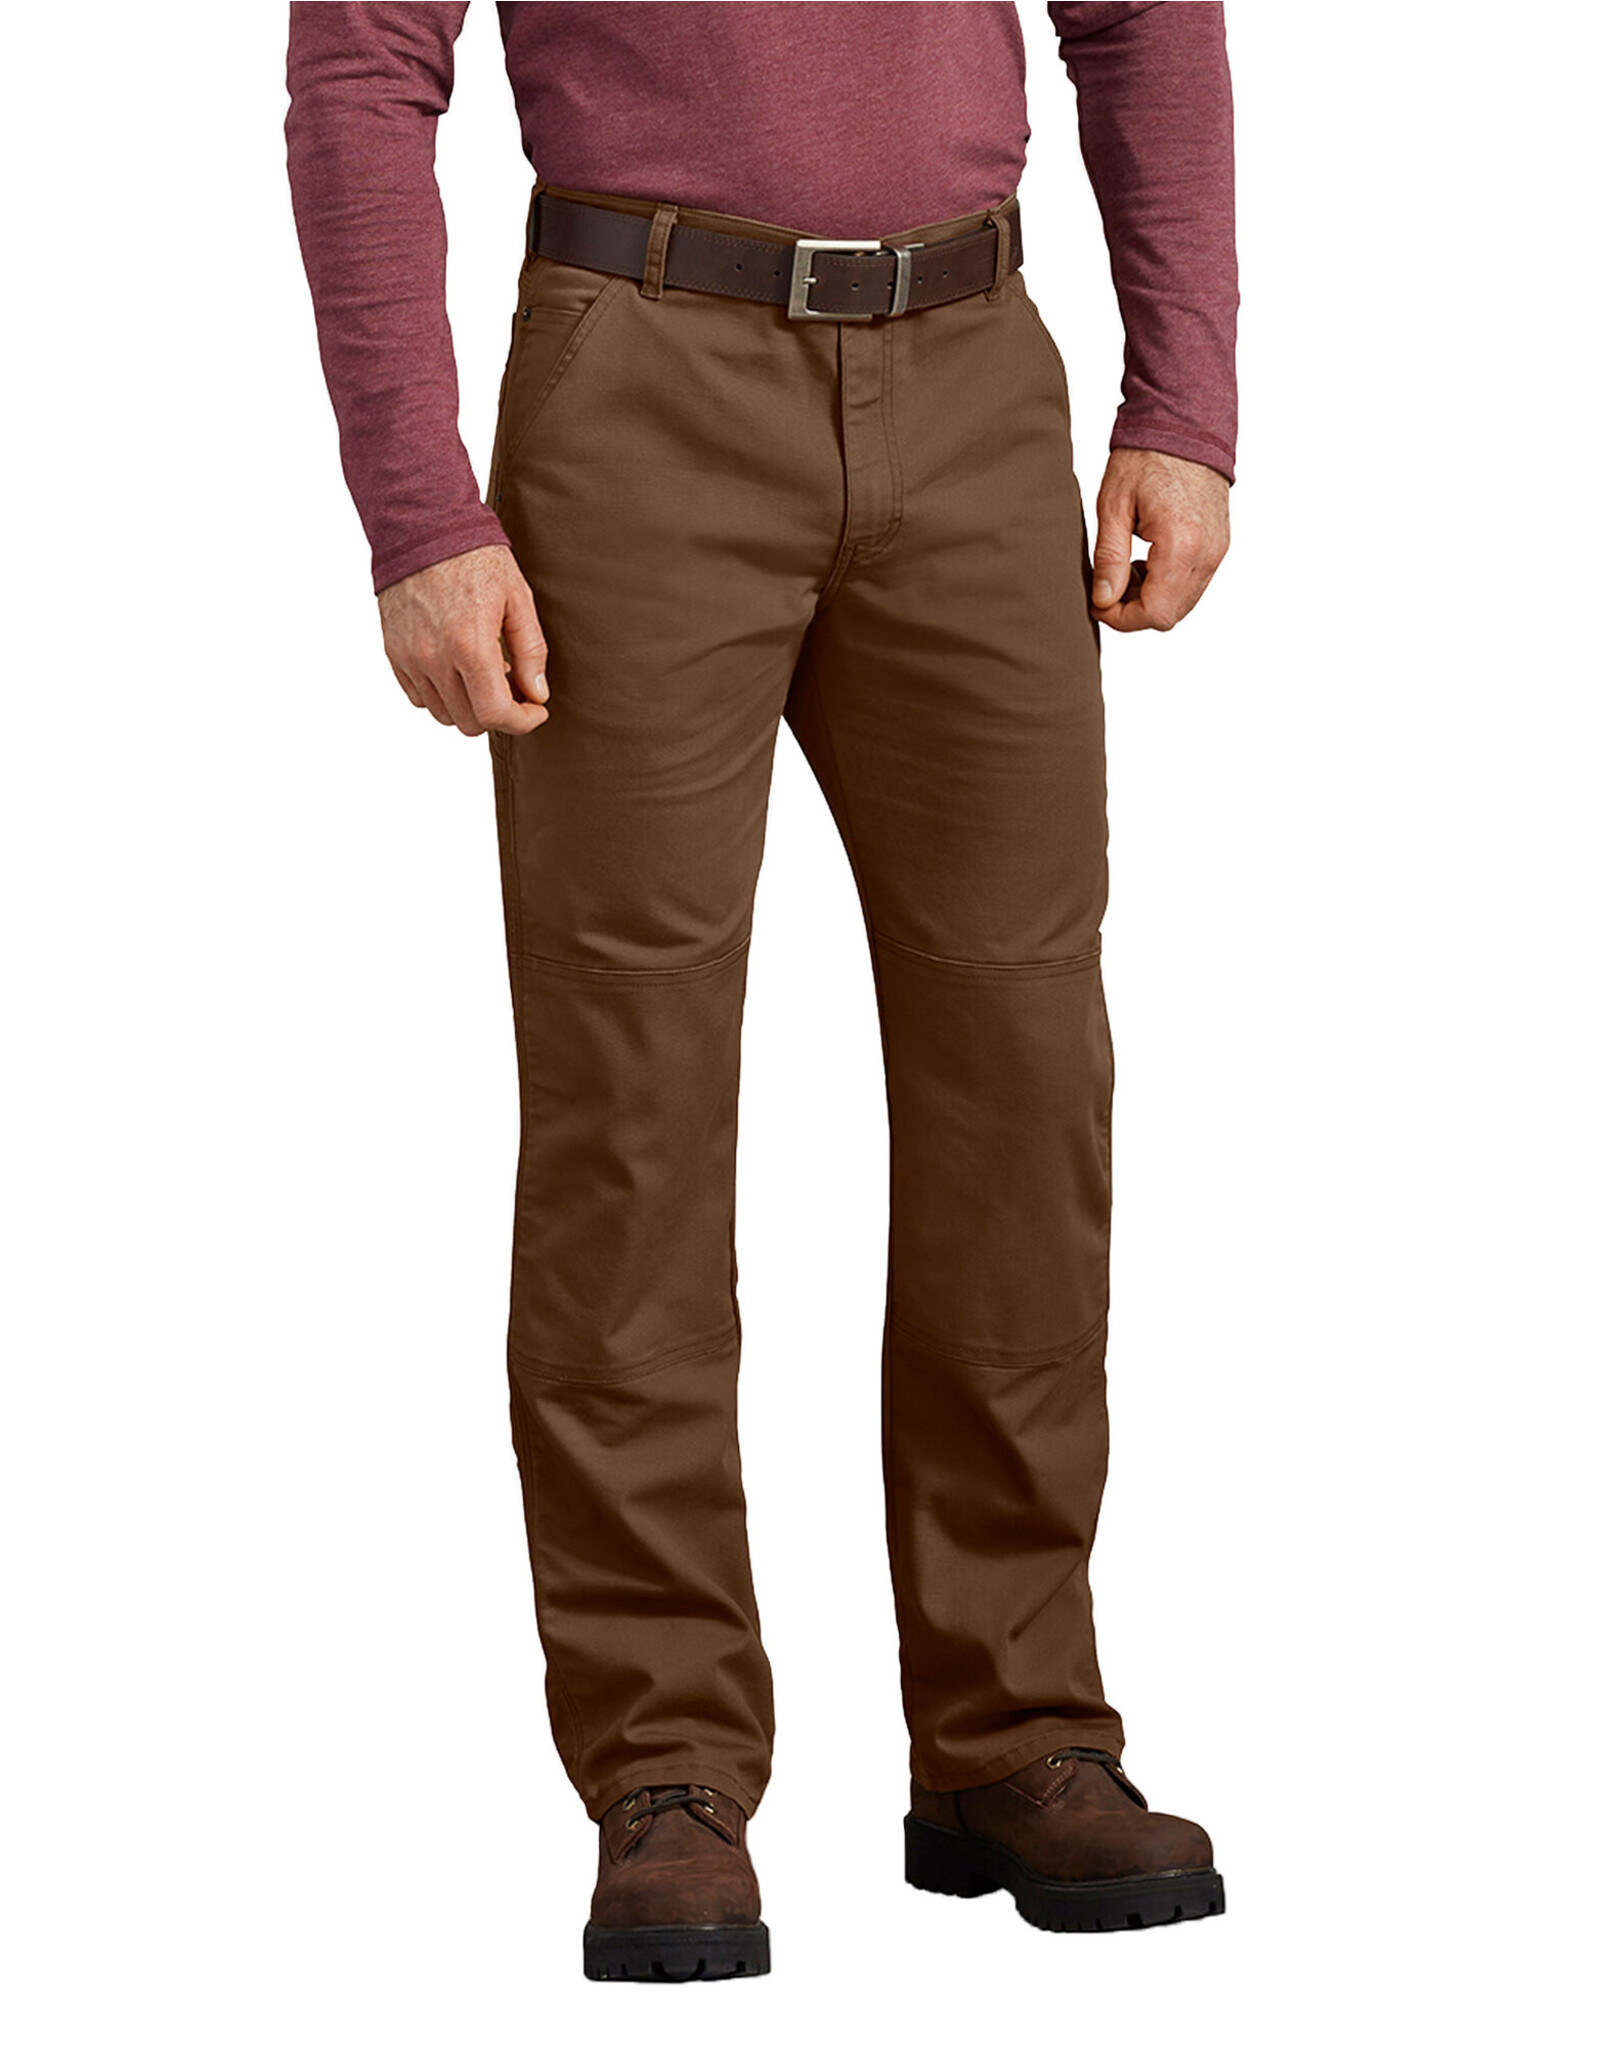 DICKIES FLEX Regular Fit Duck Double Knee Pants Stonewashed Timber Brown - DP903STB